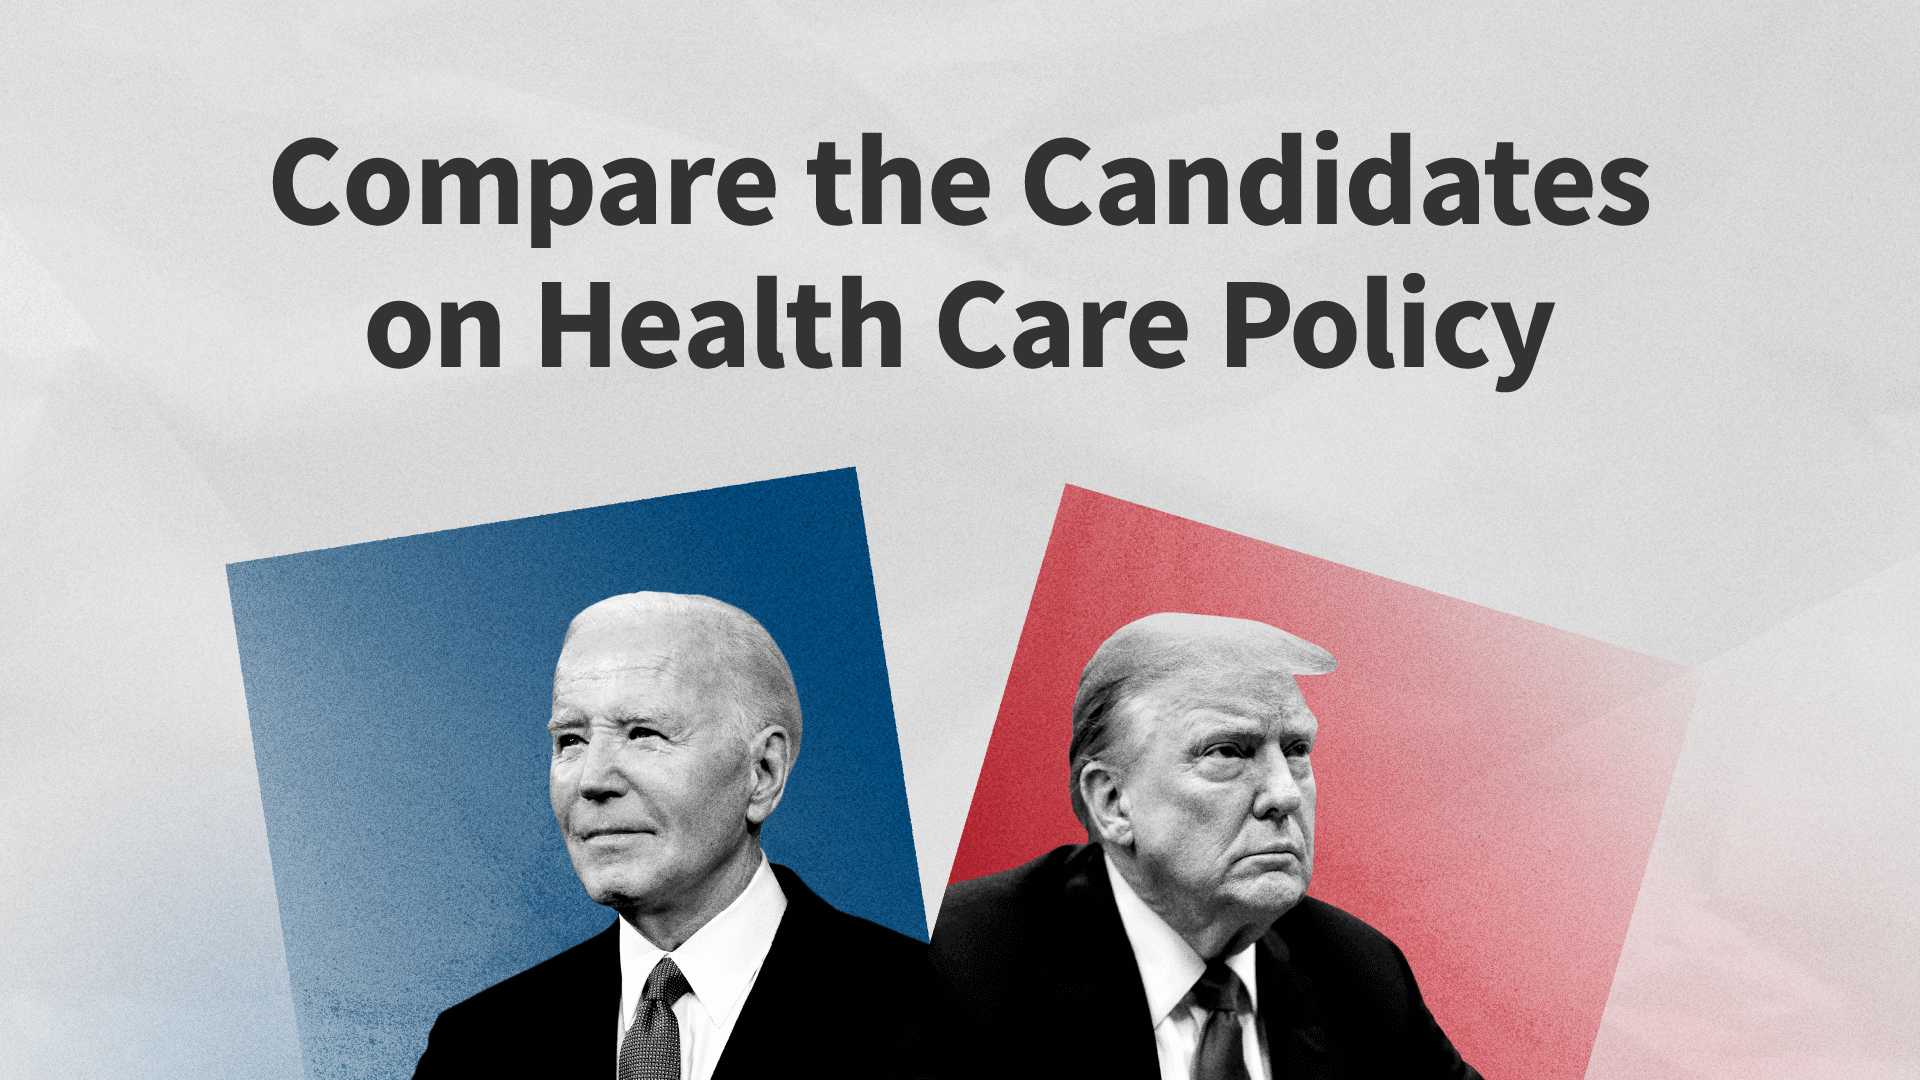 Comparing Candidates’ Health Care Policies